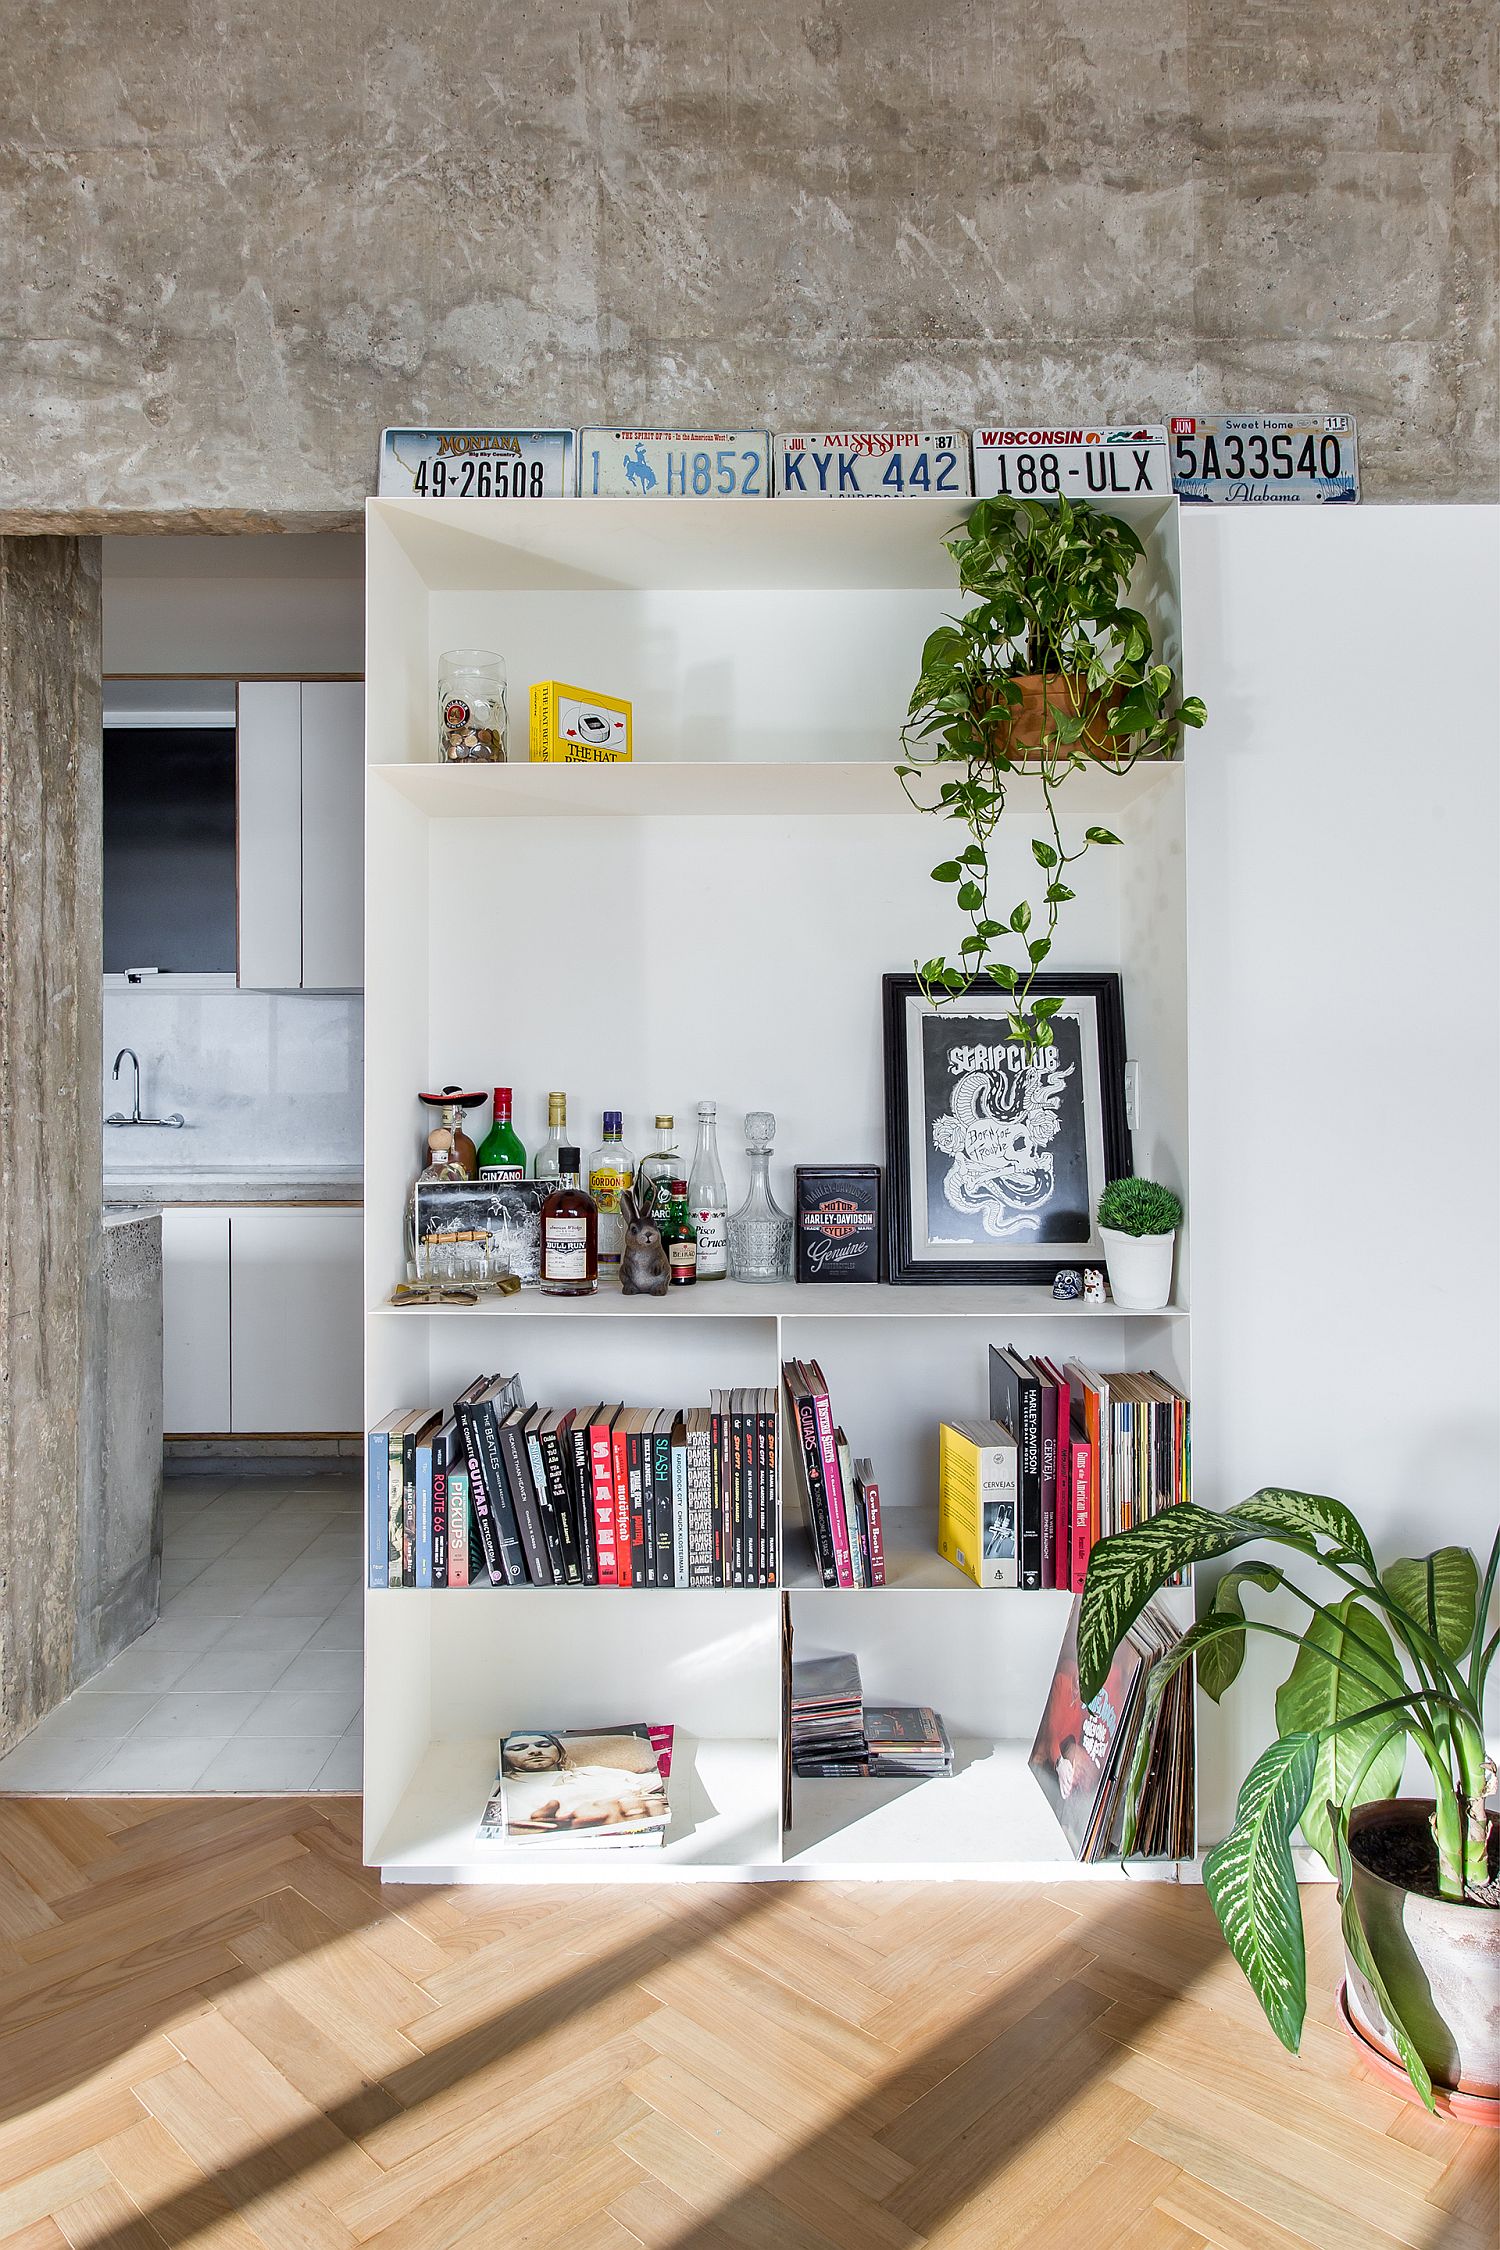 White-modern-shelf-with-smart-decorative-pieces-and-books-along-with-indoor-plants-used-to-decorate-the-living-room